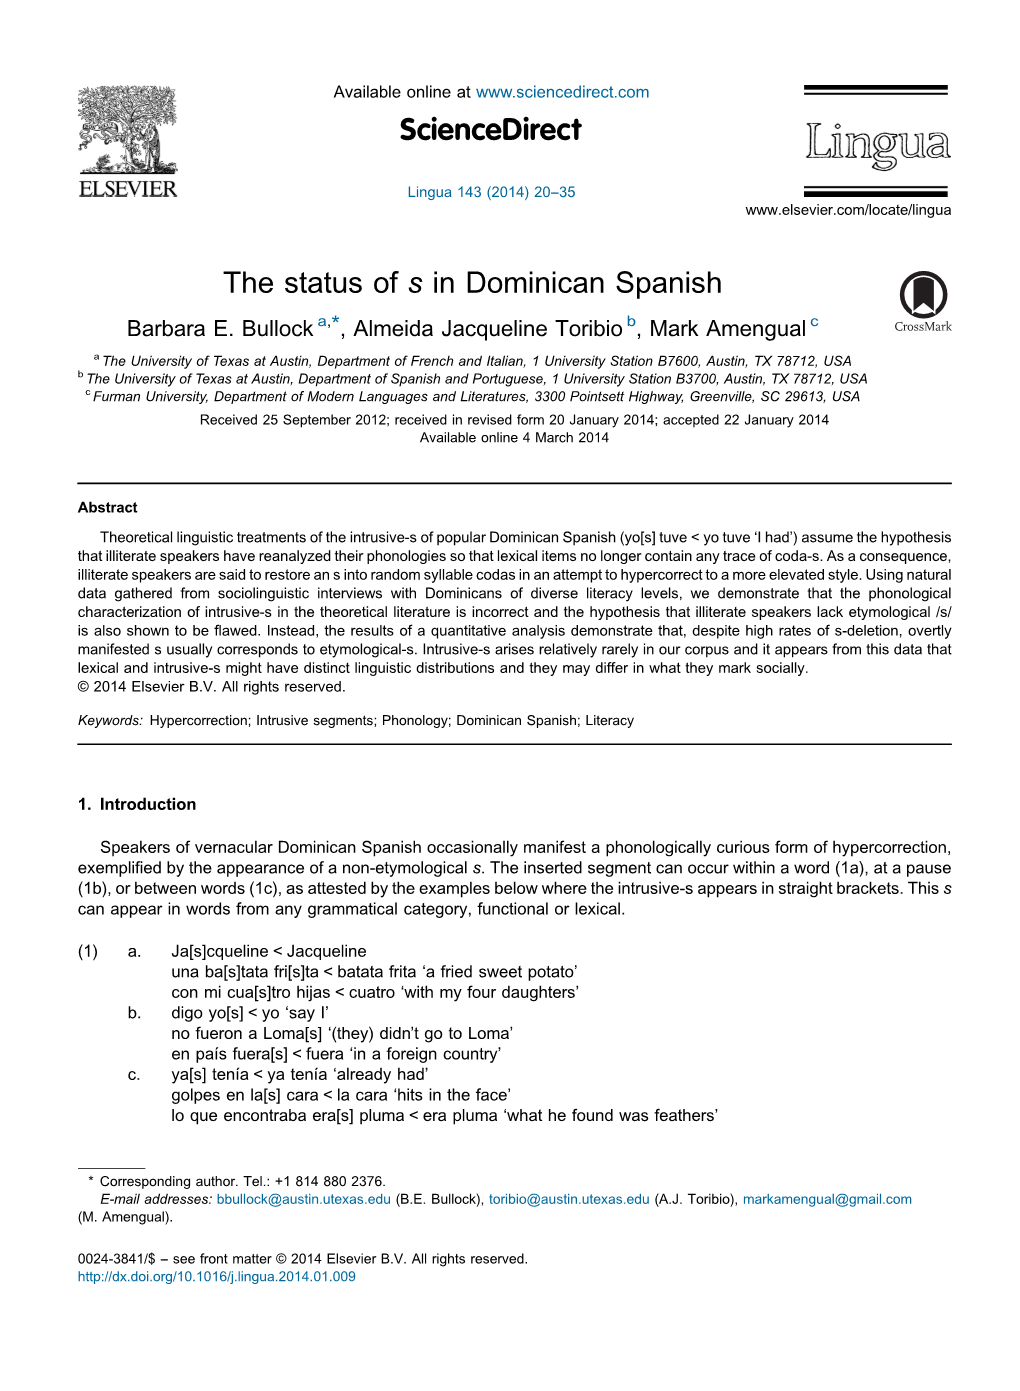 The Status of S in Dominican Spanish